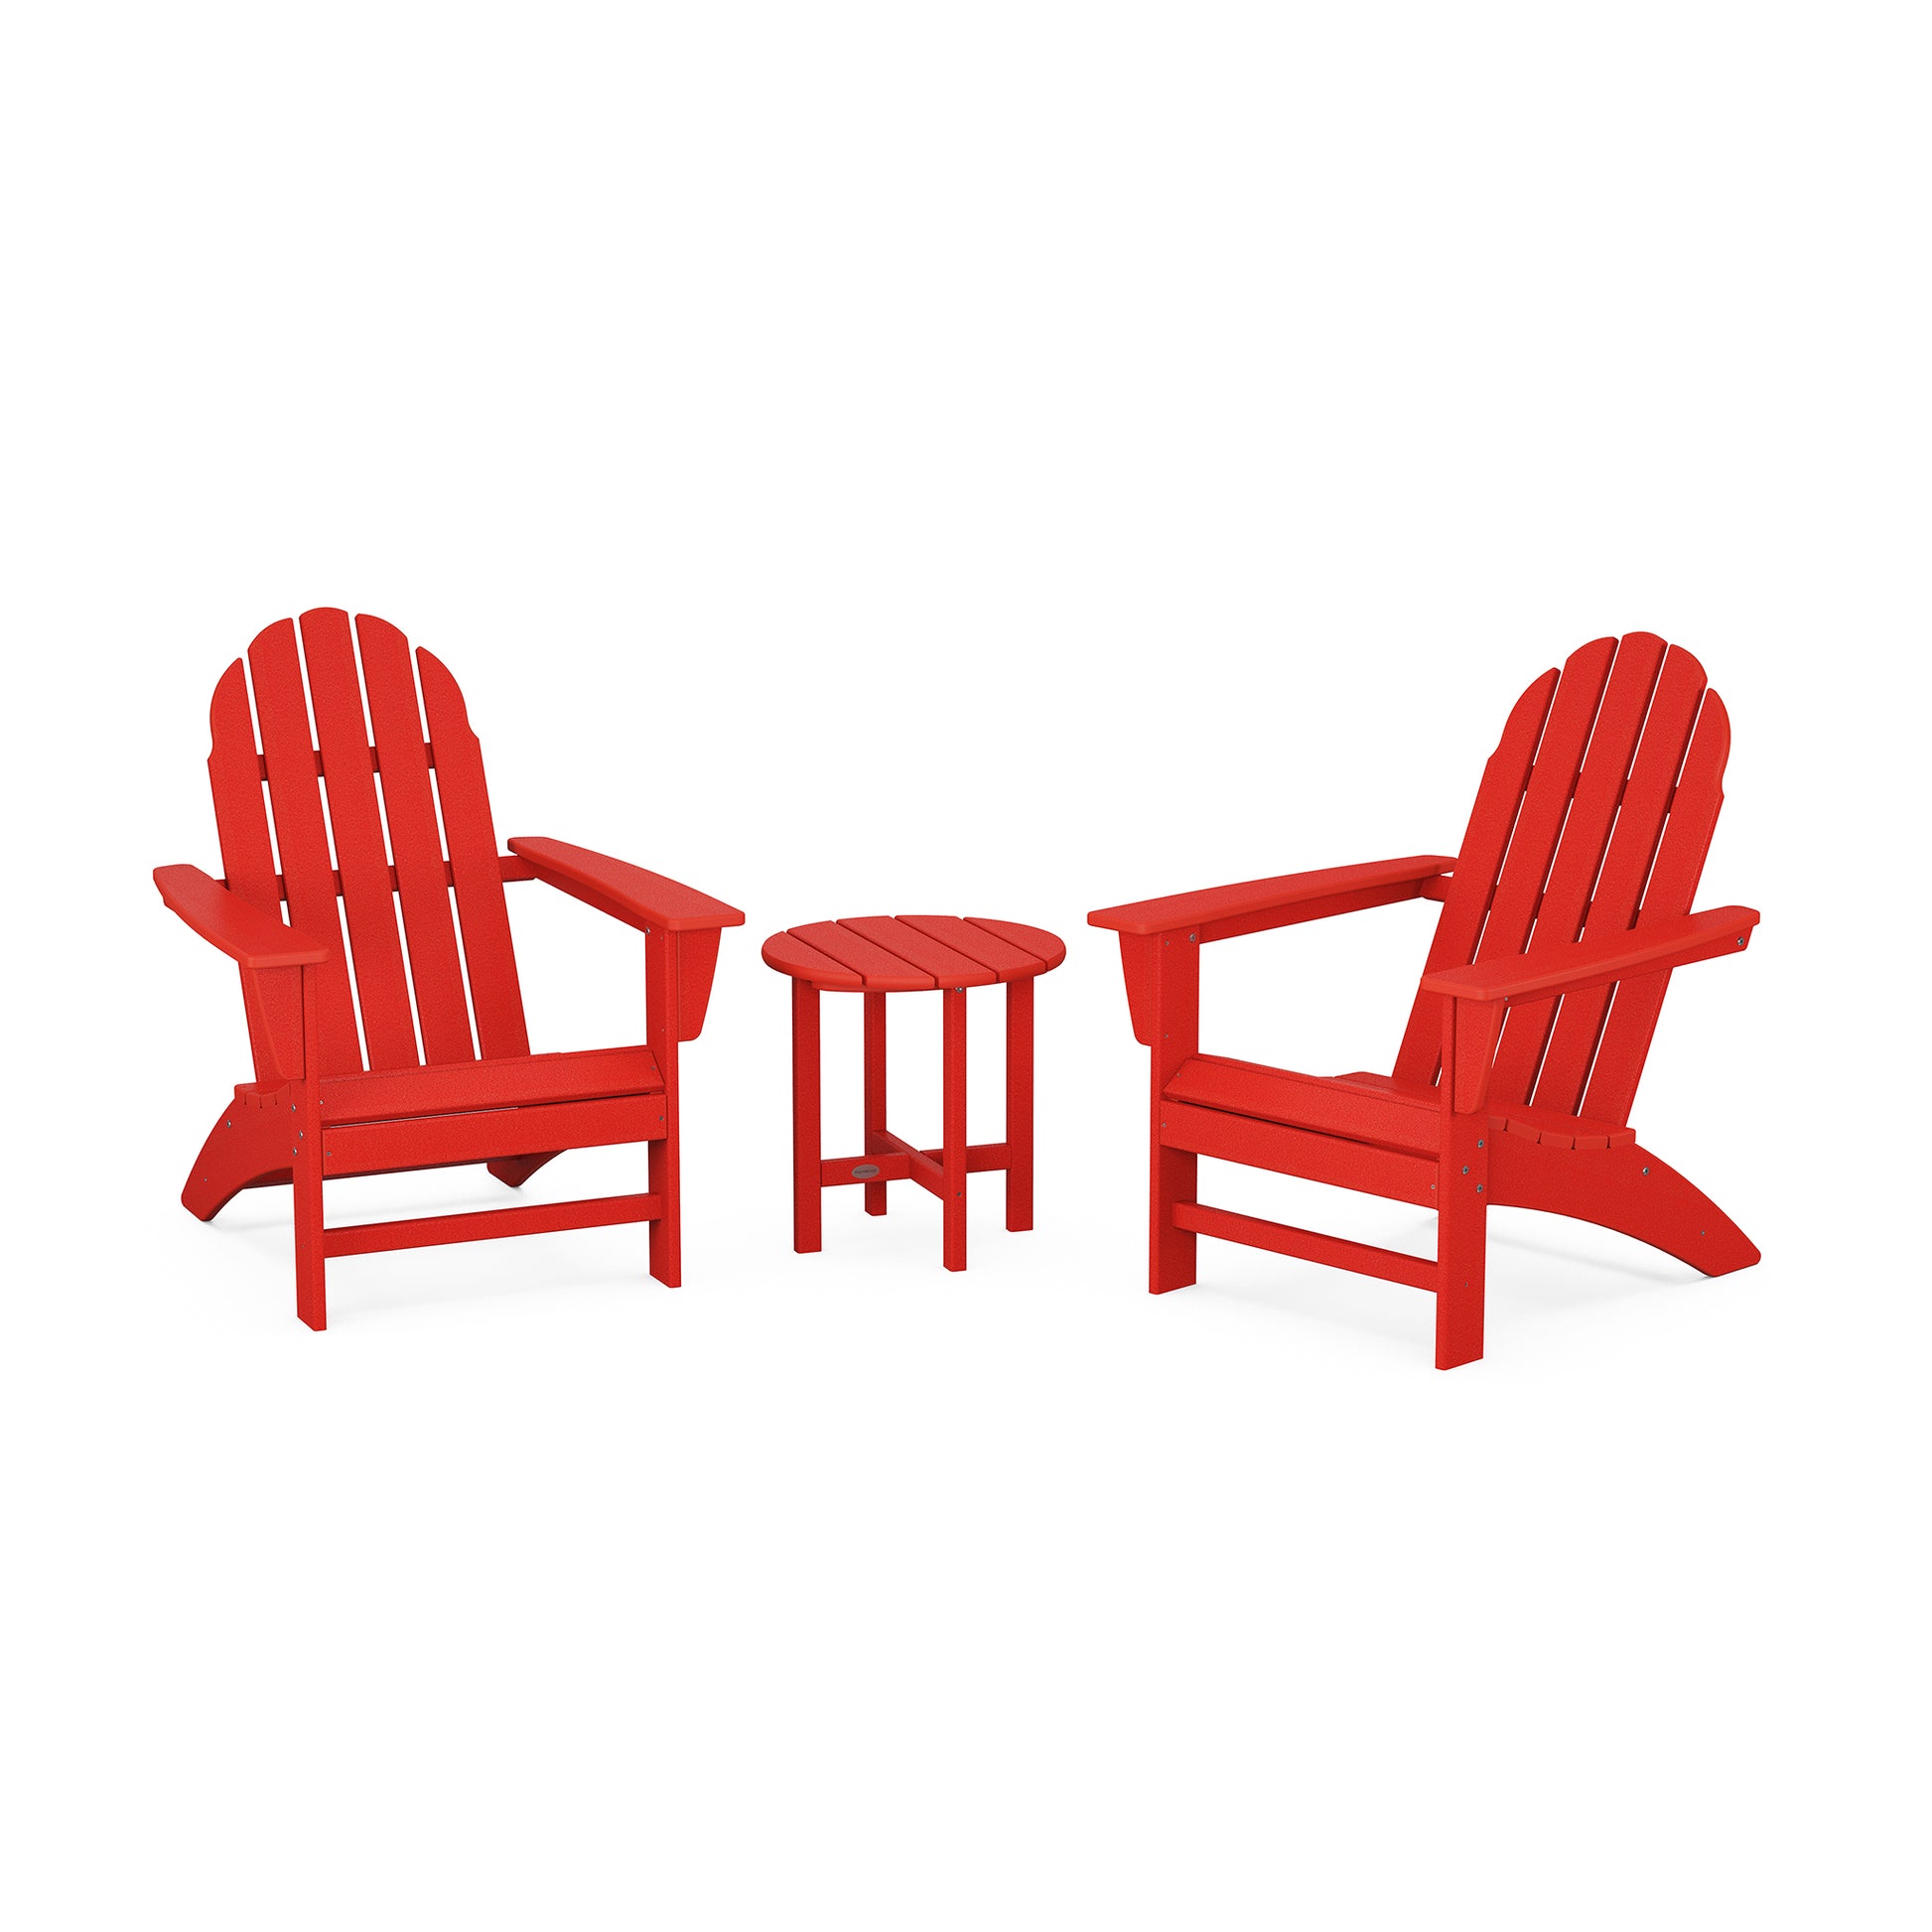 Two red POLYWOOD Vineyard Adirondack chairs flanking a small matching side table, arranged against a white background.